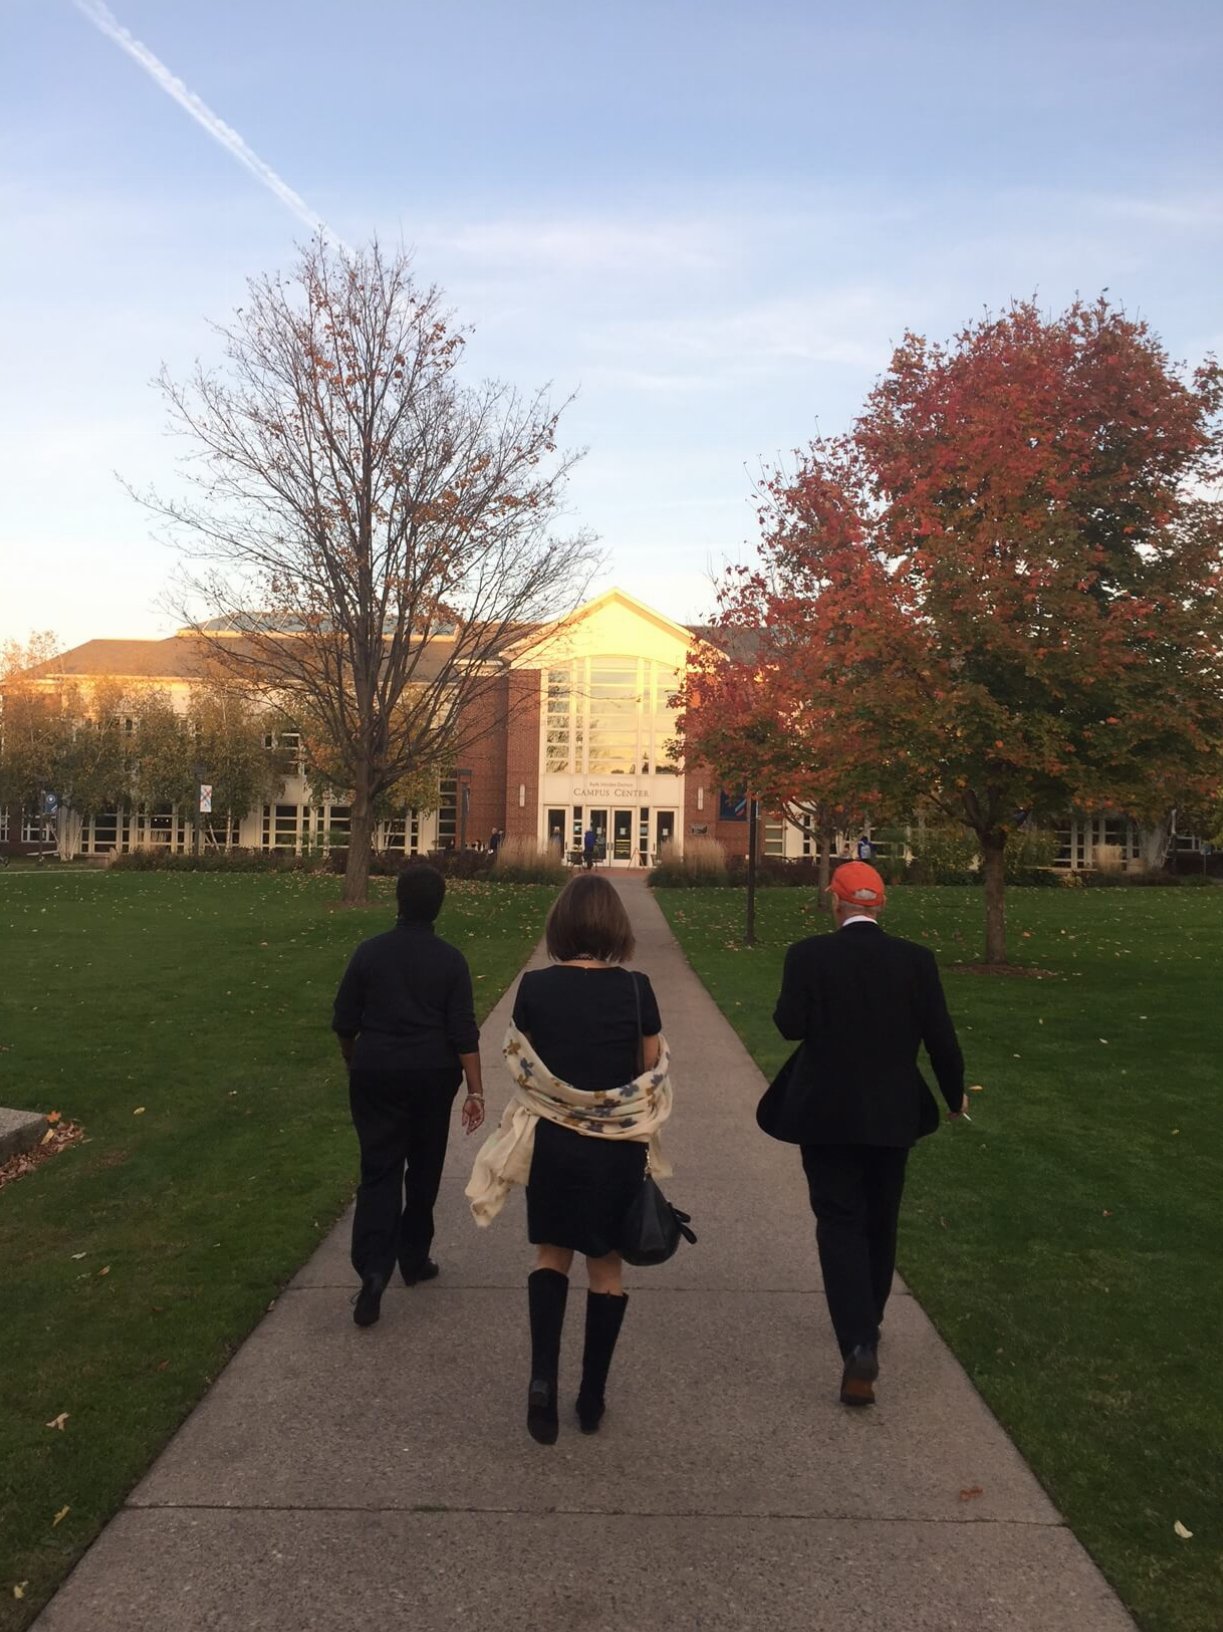 Three people walking on a college campus